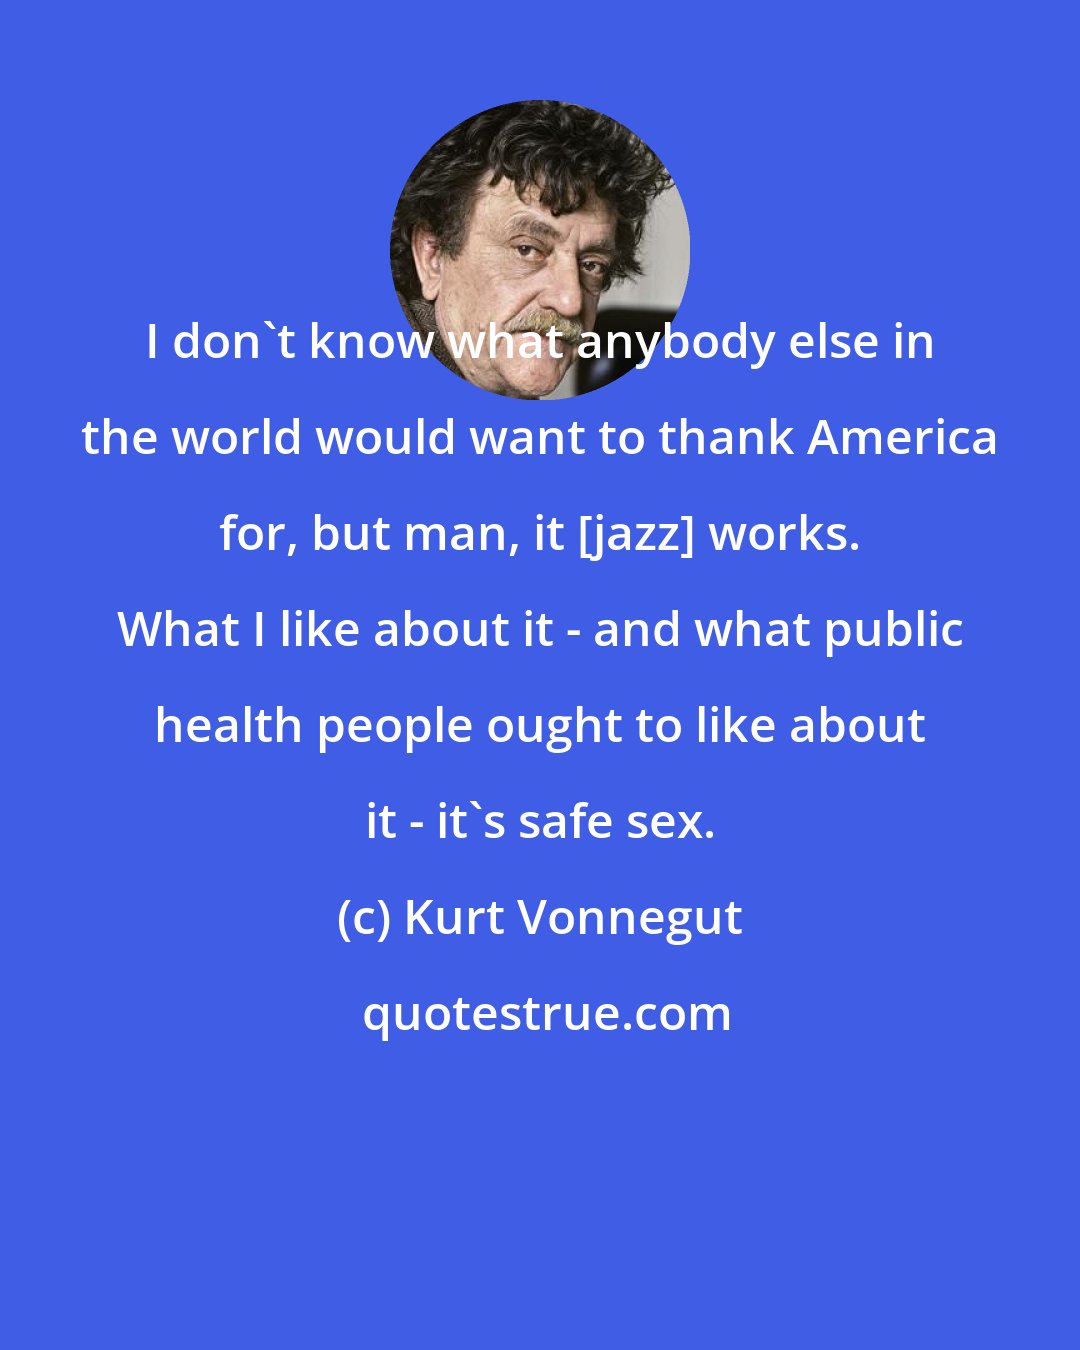 Kurt Vonnegut: I don't know what anybody else in the world would want to thank America for, but man, it [jazz] works. What I like about it - and what public health people ought to like about it - it's safe sex.